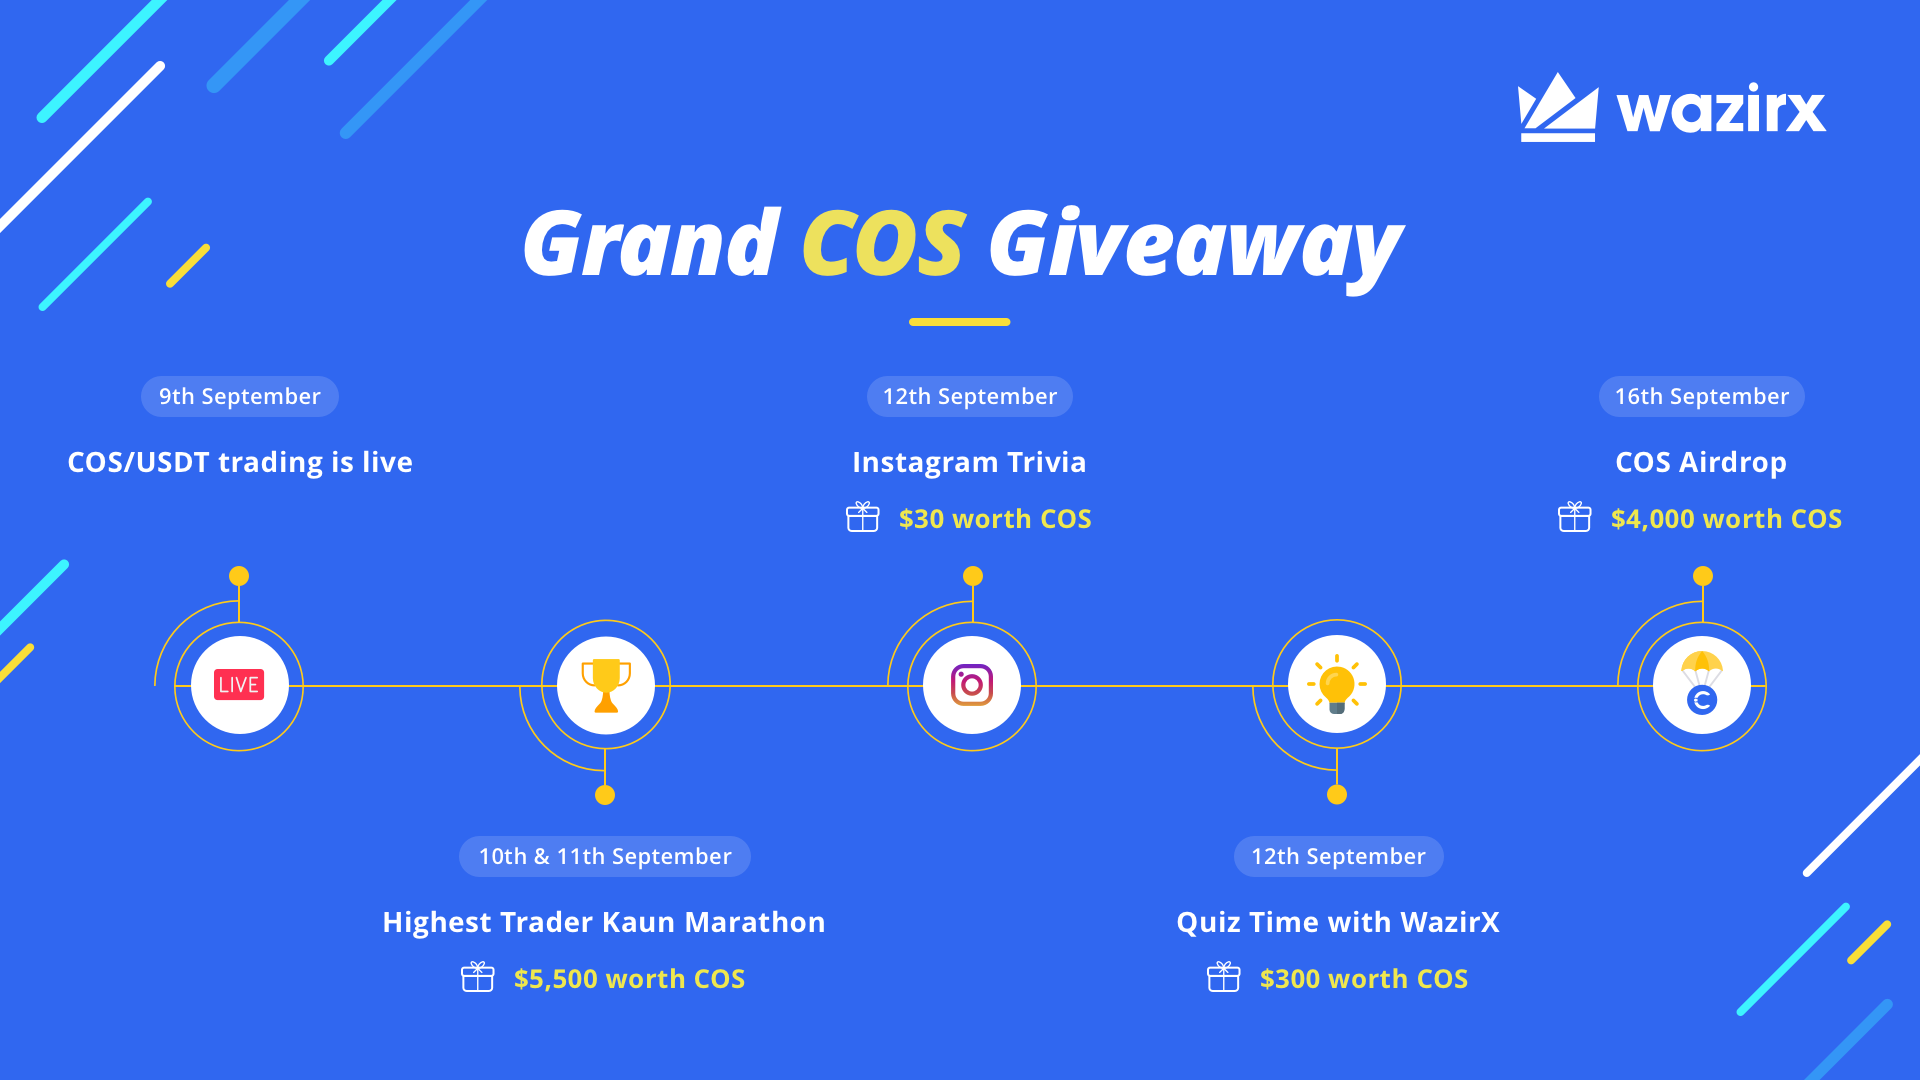 Grand COS Giveaway